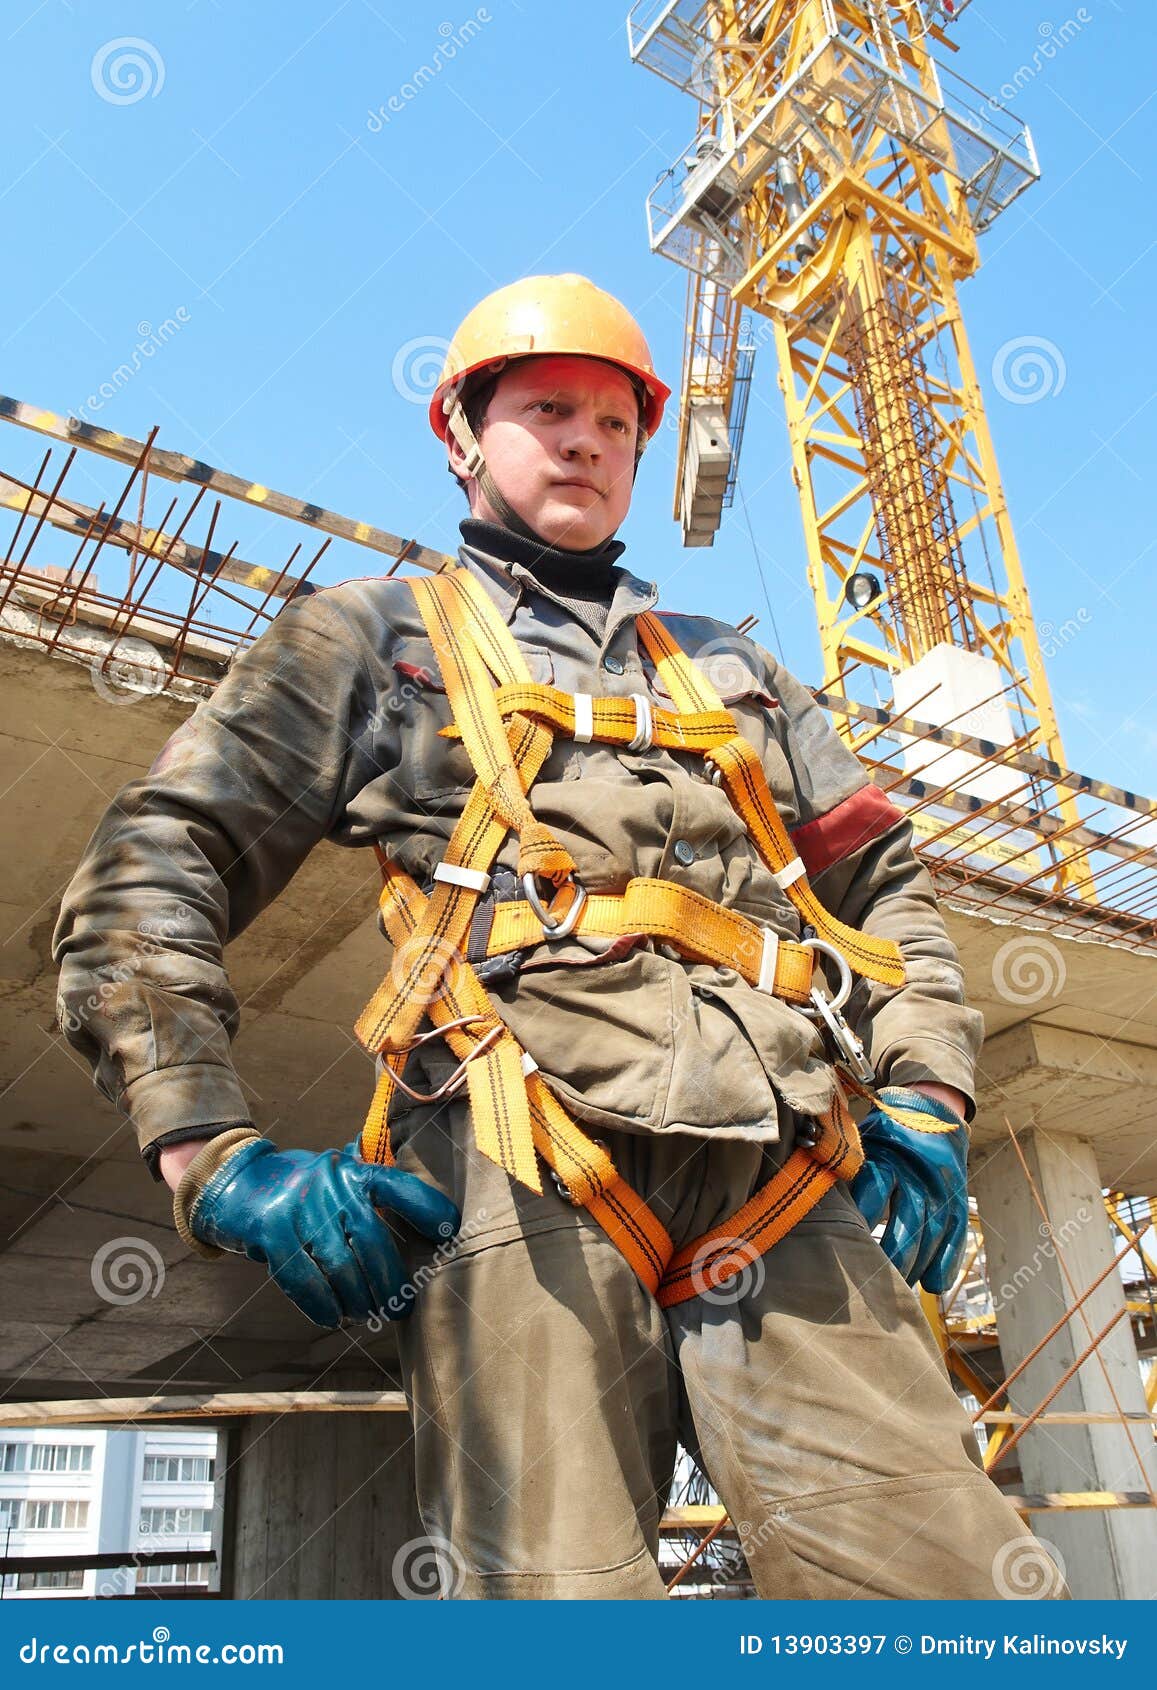 What to Wear on a Construction Site